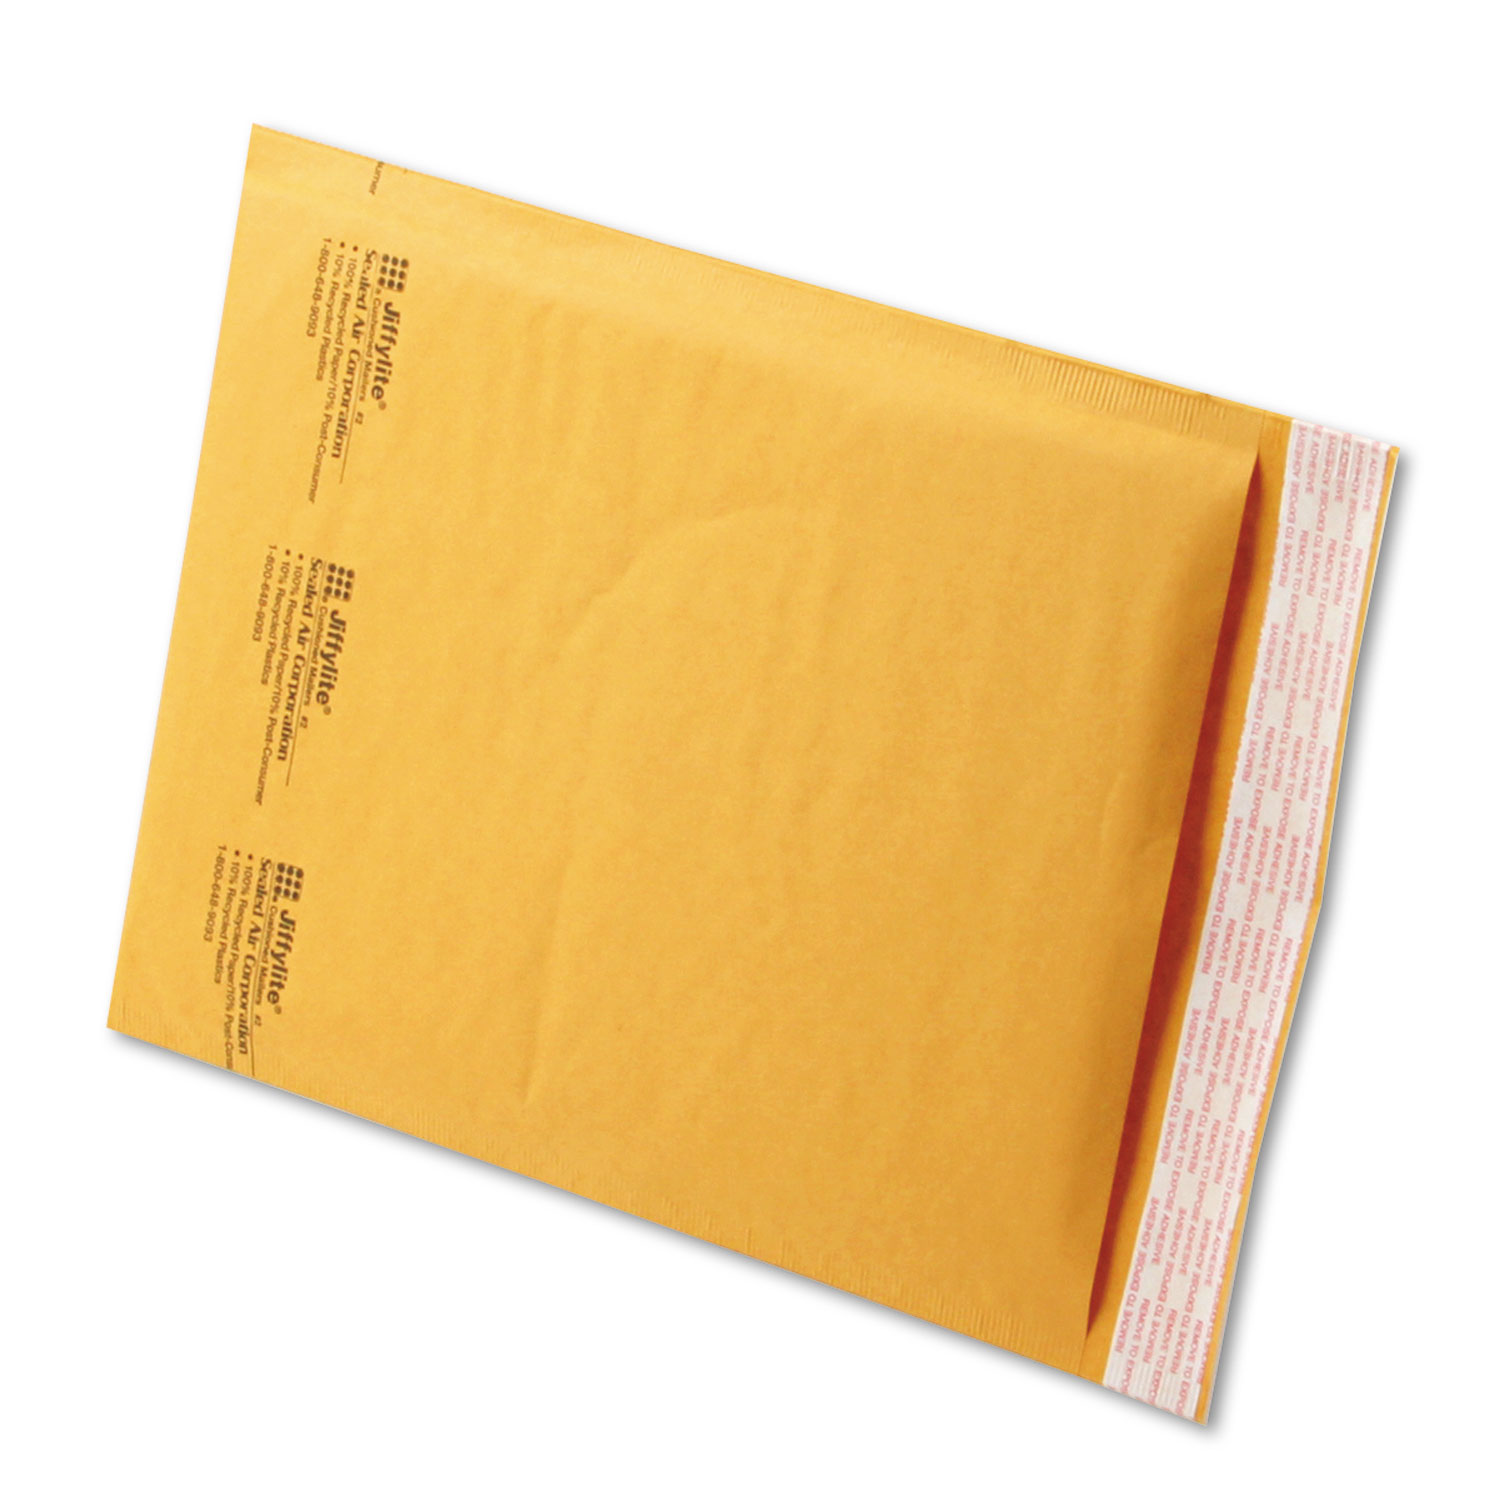  Sealed Air 39093 Jiffylite Self-Seal Bubble Mailer, #2, Barrier Bubble Lining, Self-Adhesive Closure, 8.5 x 12, Golden Brown Kraft, 100/Carton (SEL39093) 